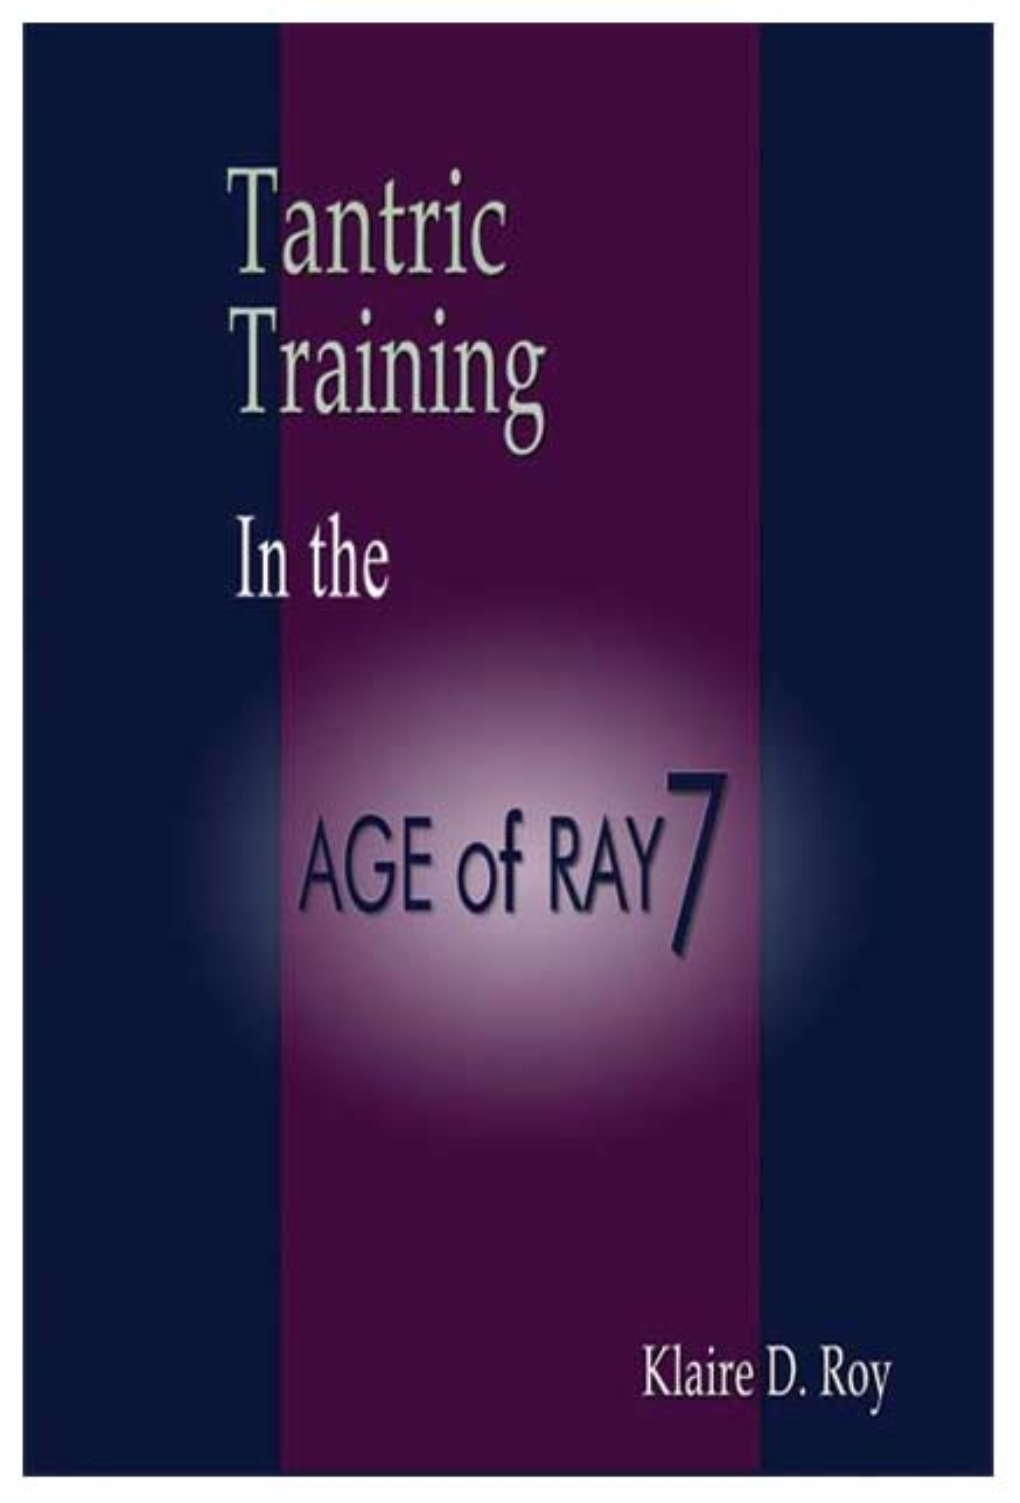 Extraits Tantric Training in the Age of Ray 7.Pdf